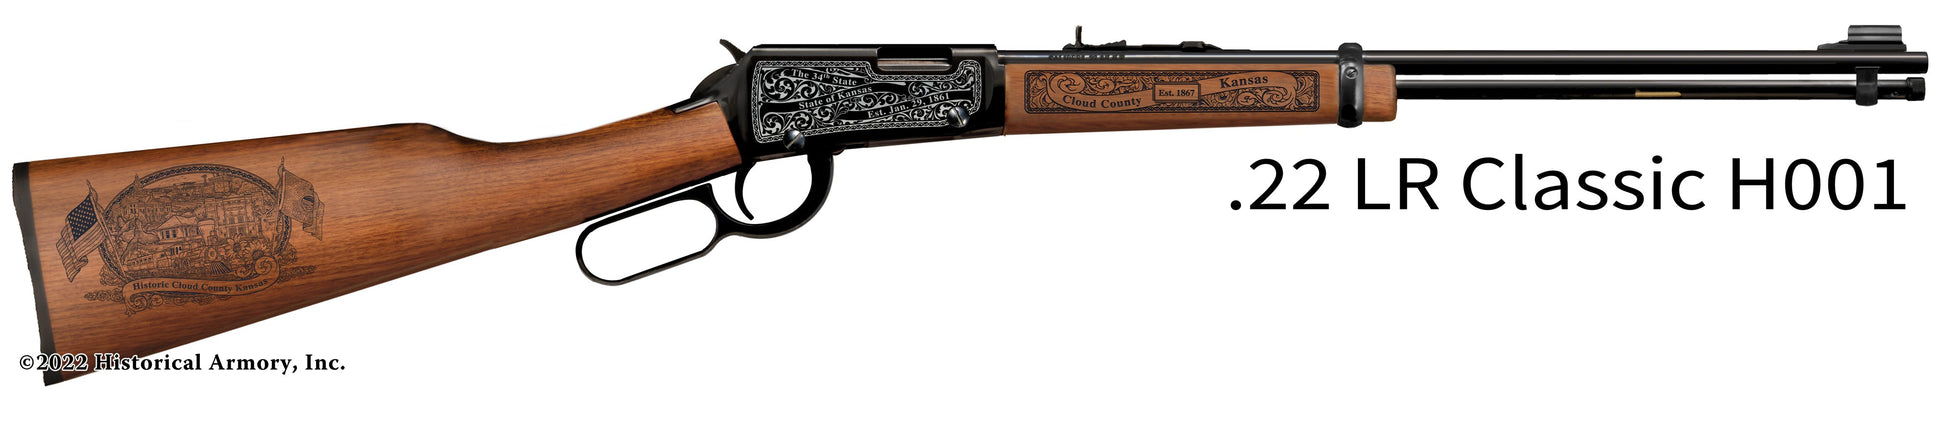 Cloud County Kansas Engraved Henry H001 Rifle